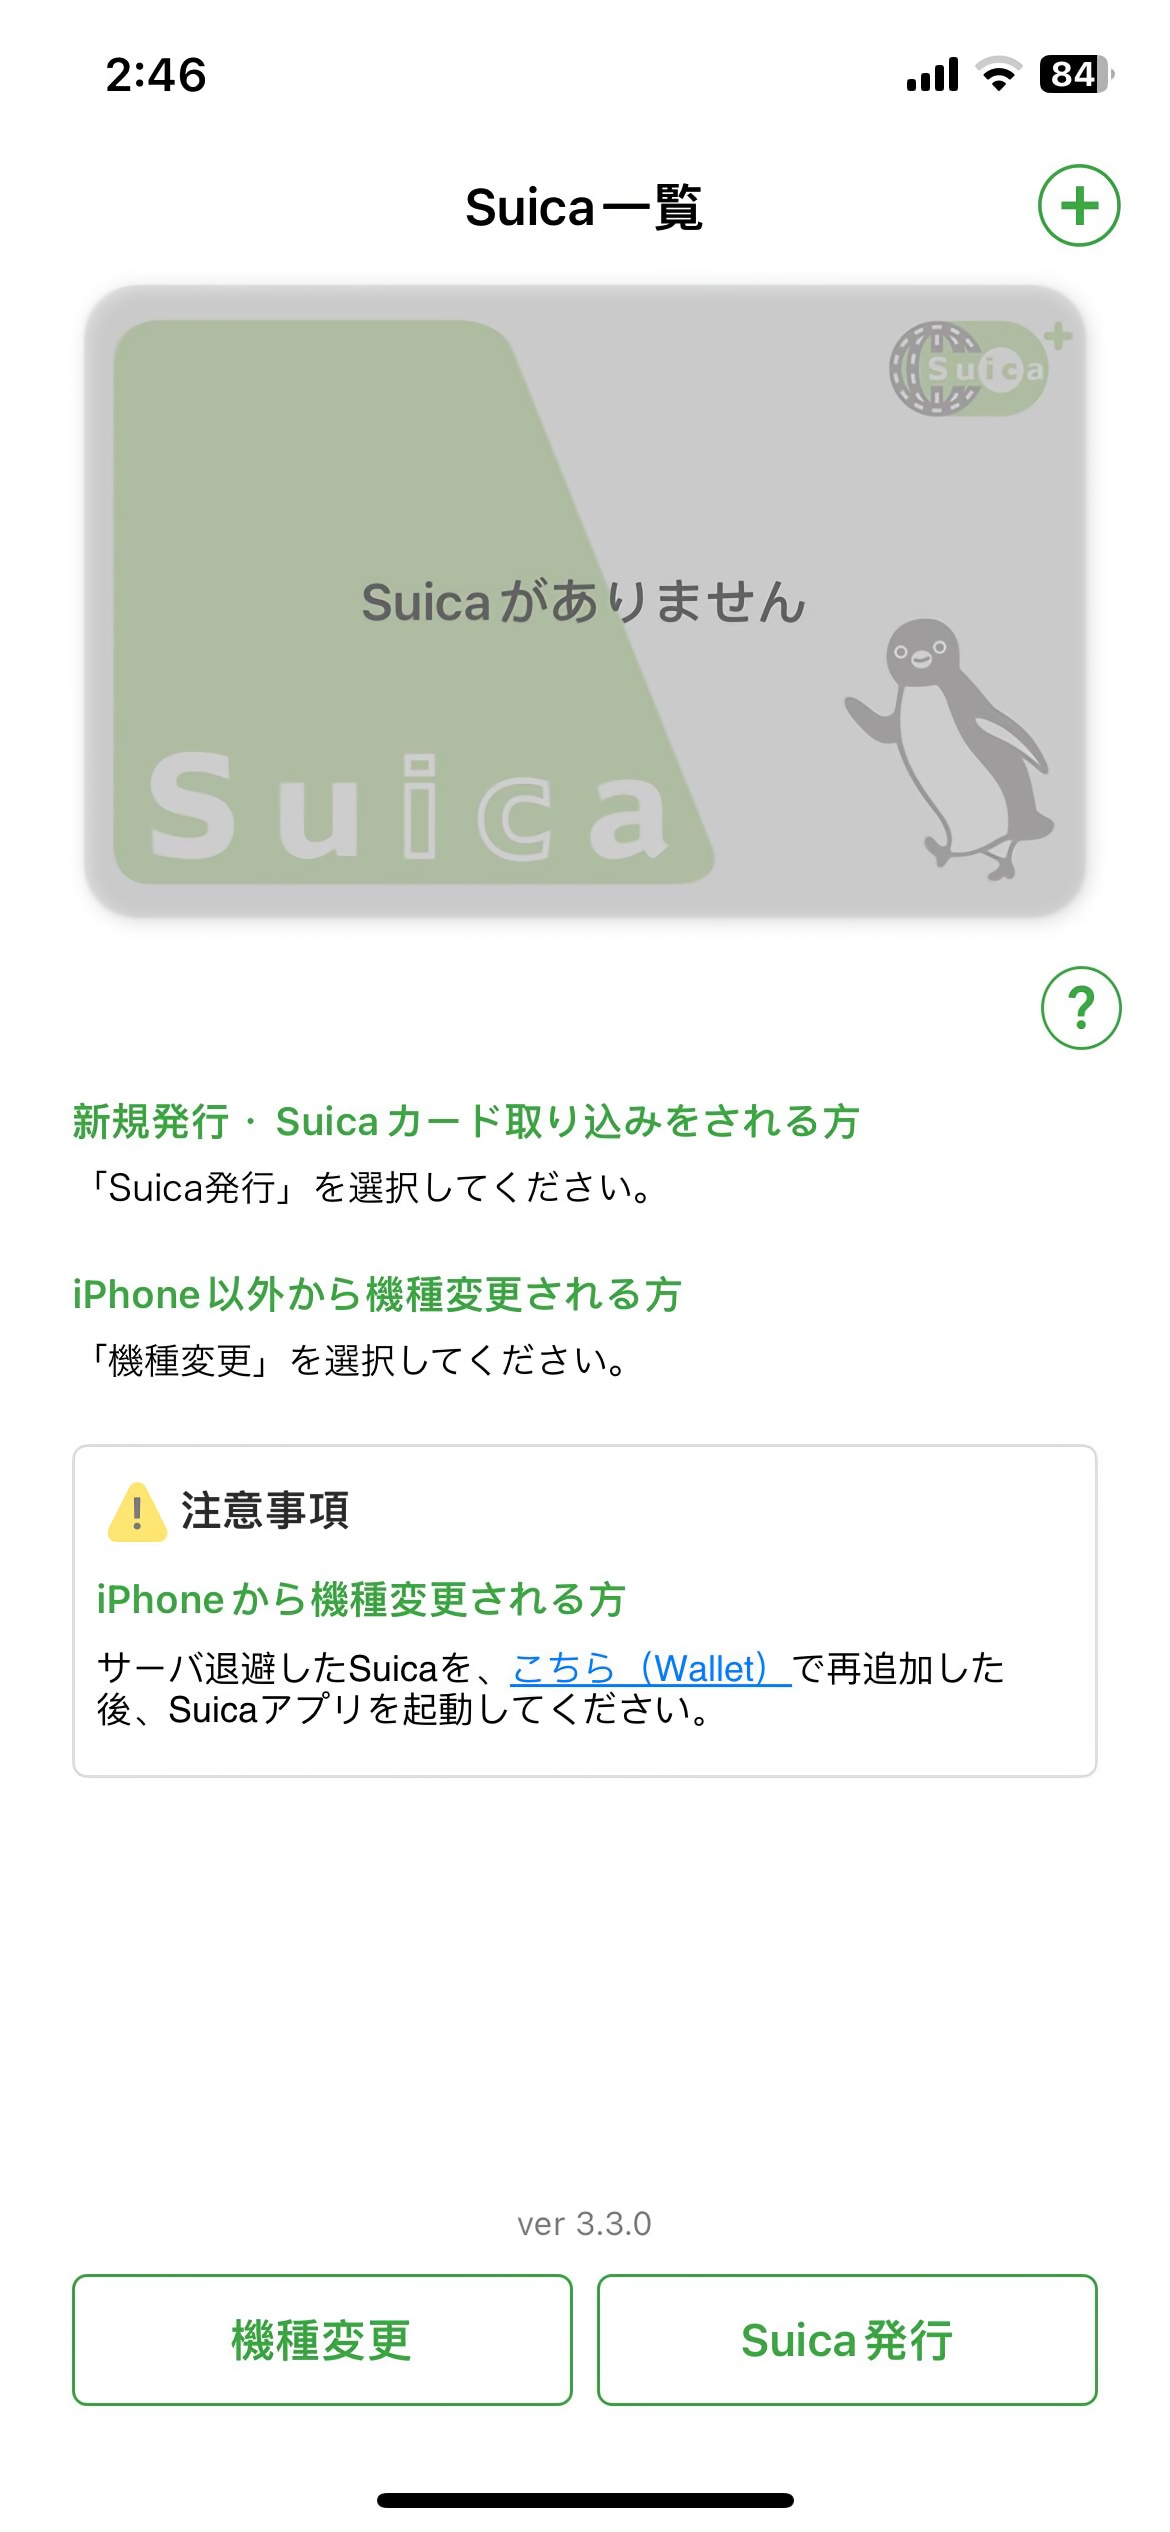 Screenshot of an app with an image of a Suica card and several buttons